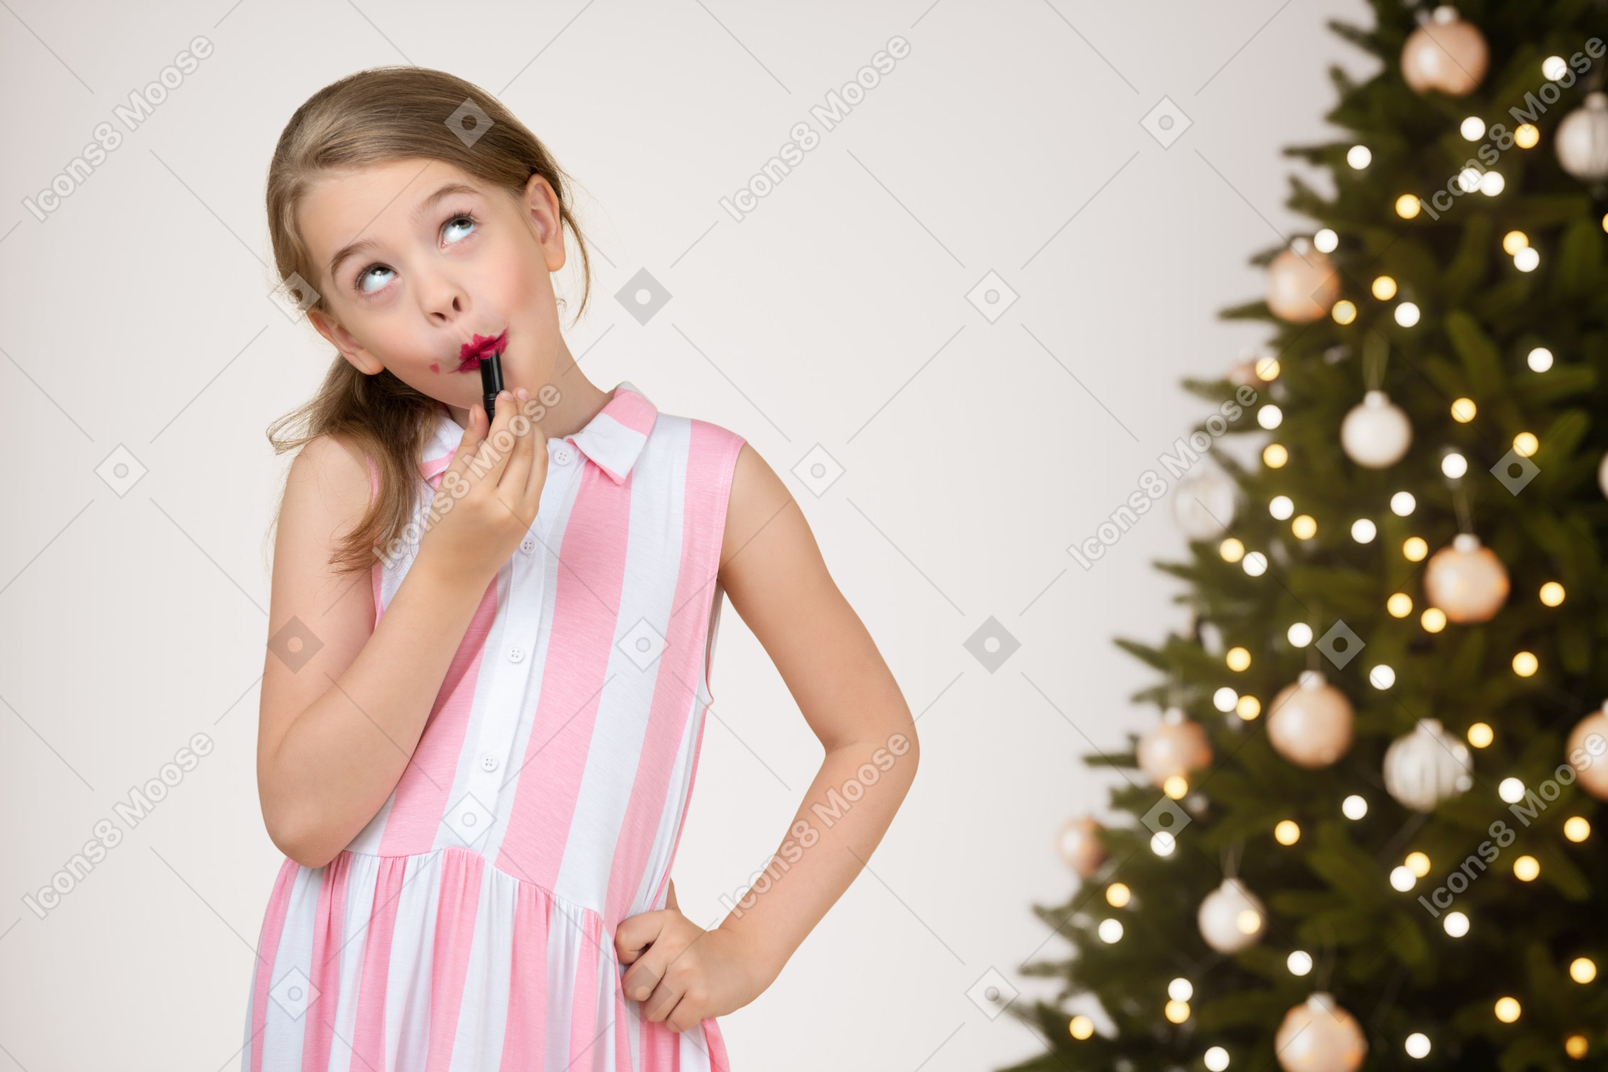 Young girl putting lipstick on her lips before christmas party